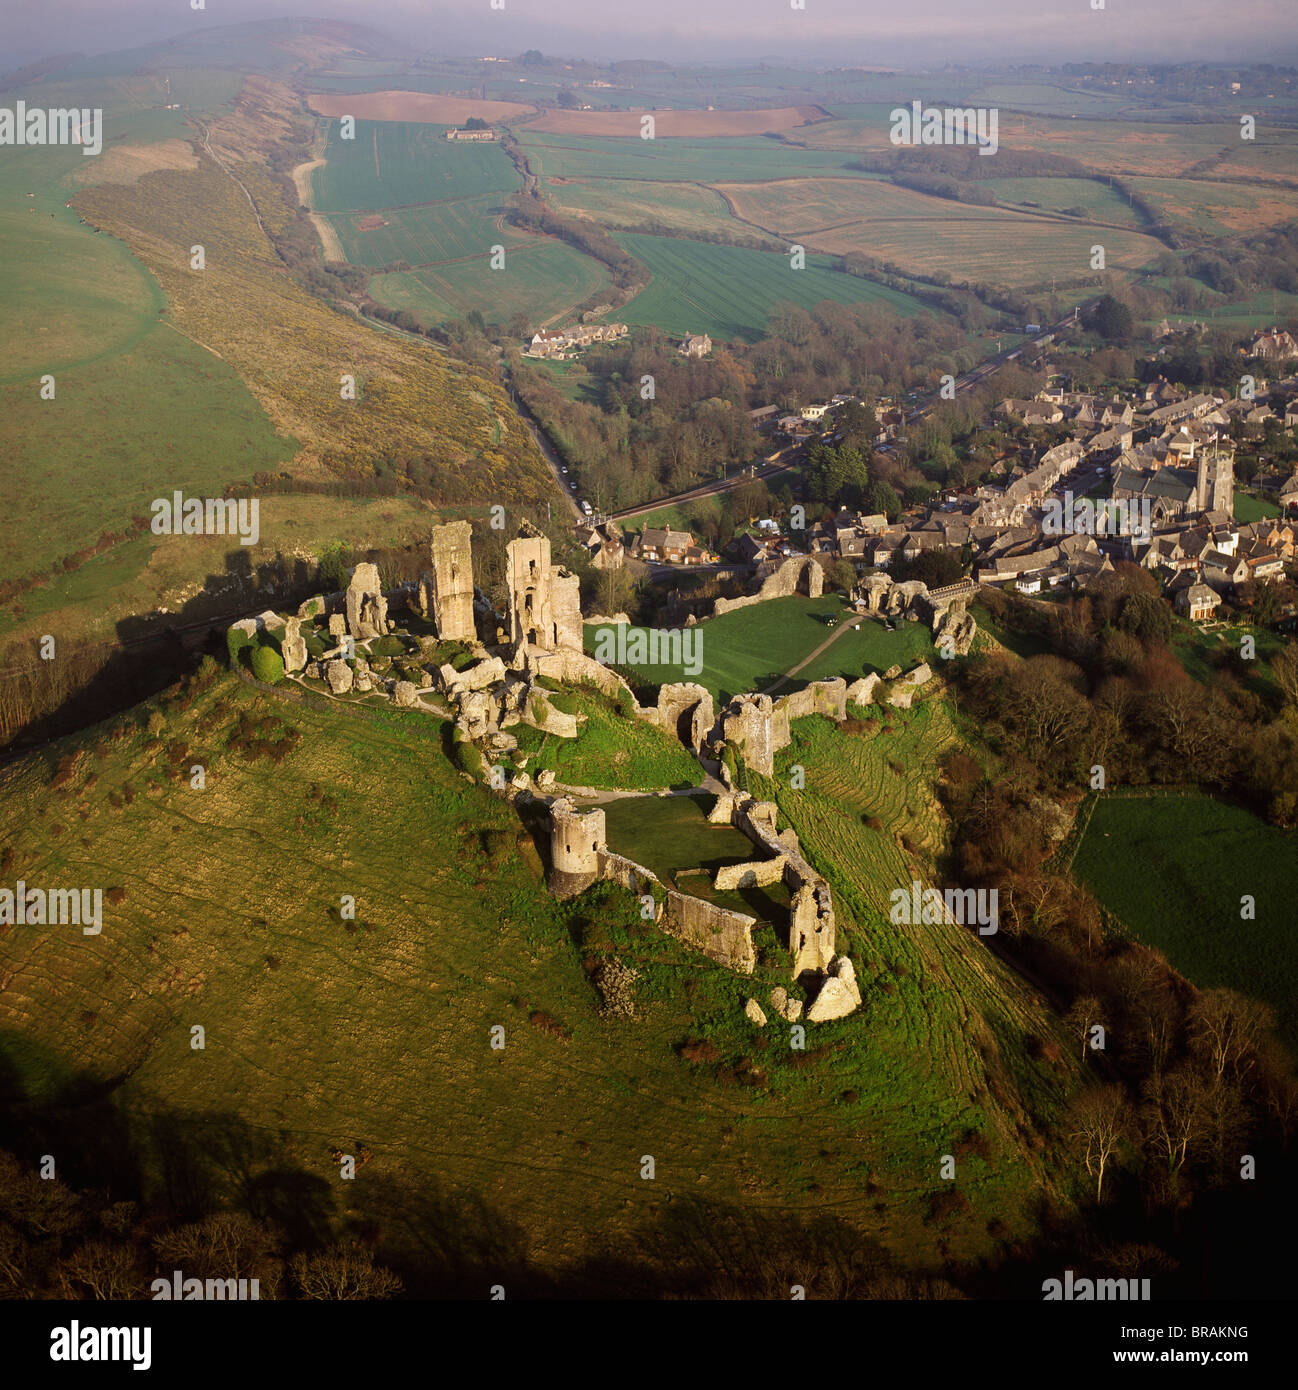 Aerial image of Corfe Castle, Purbeck Hills, between Wareham and Swanage, Dorset, England, United Kingdom, Europe Stock Photo